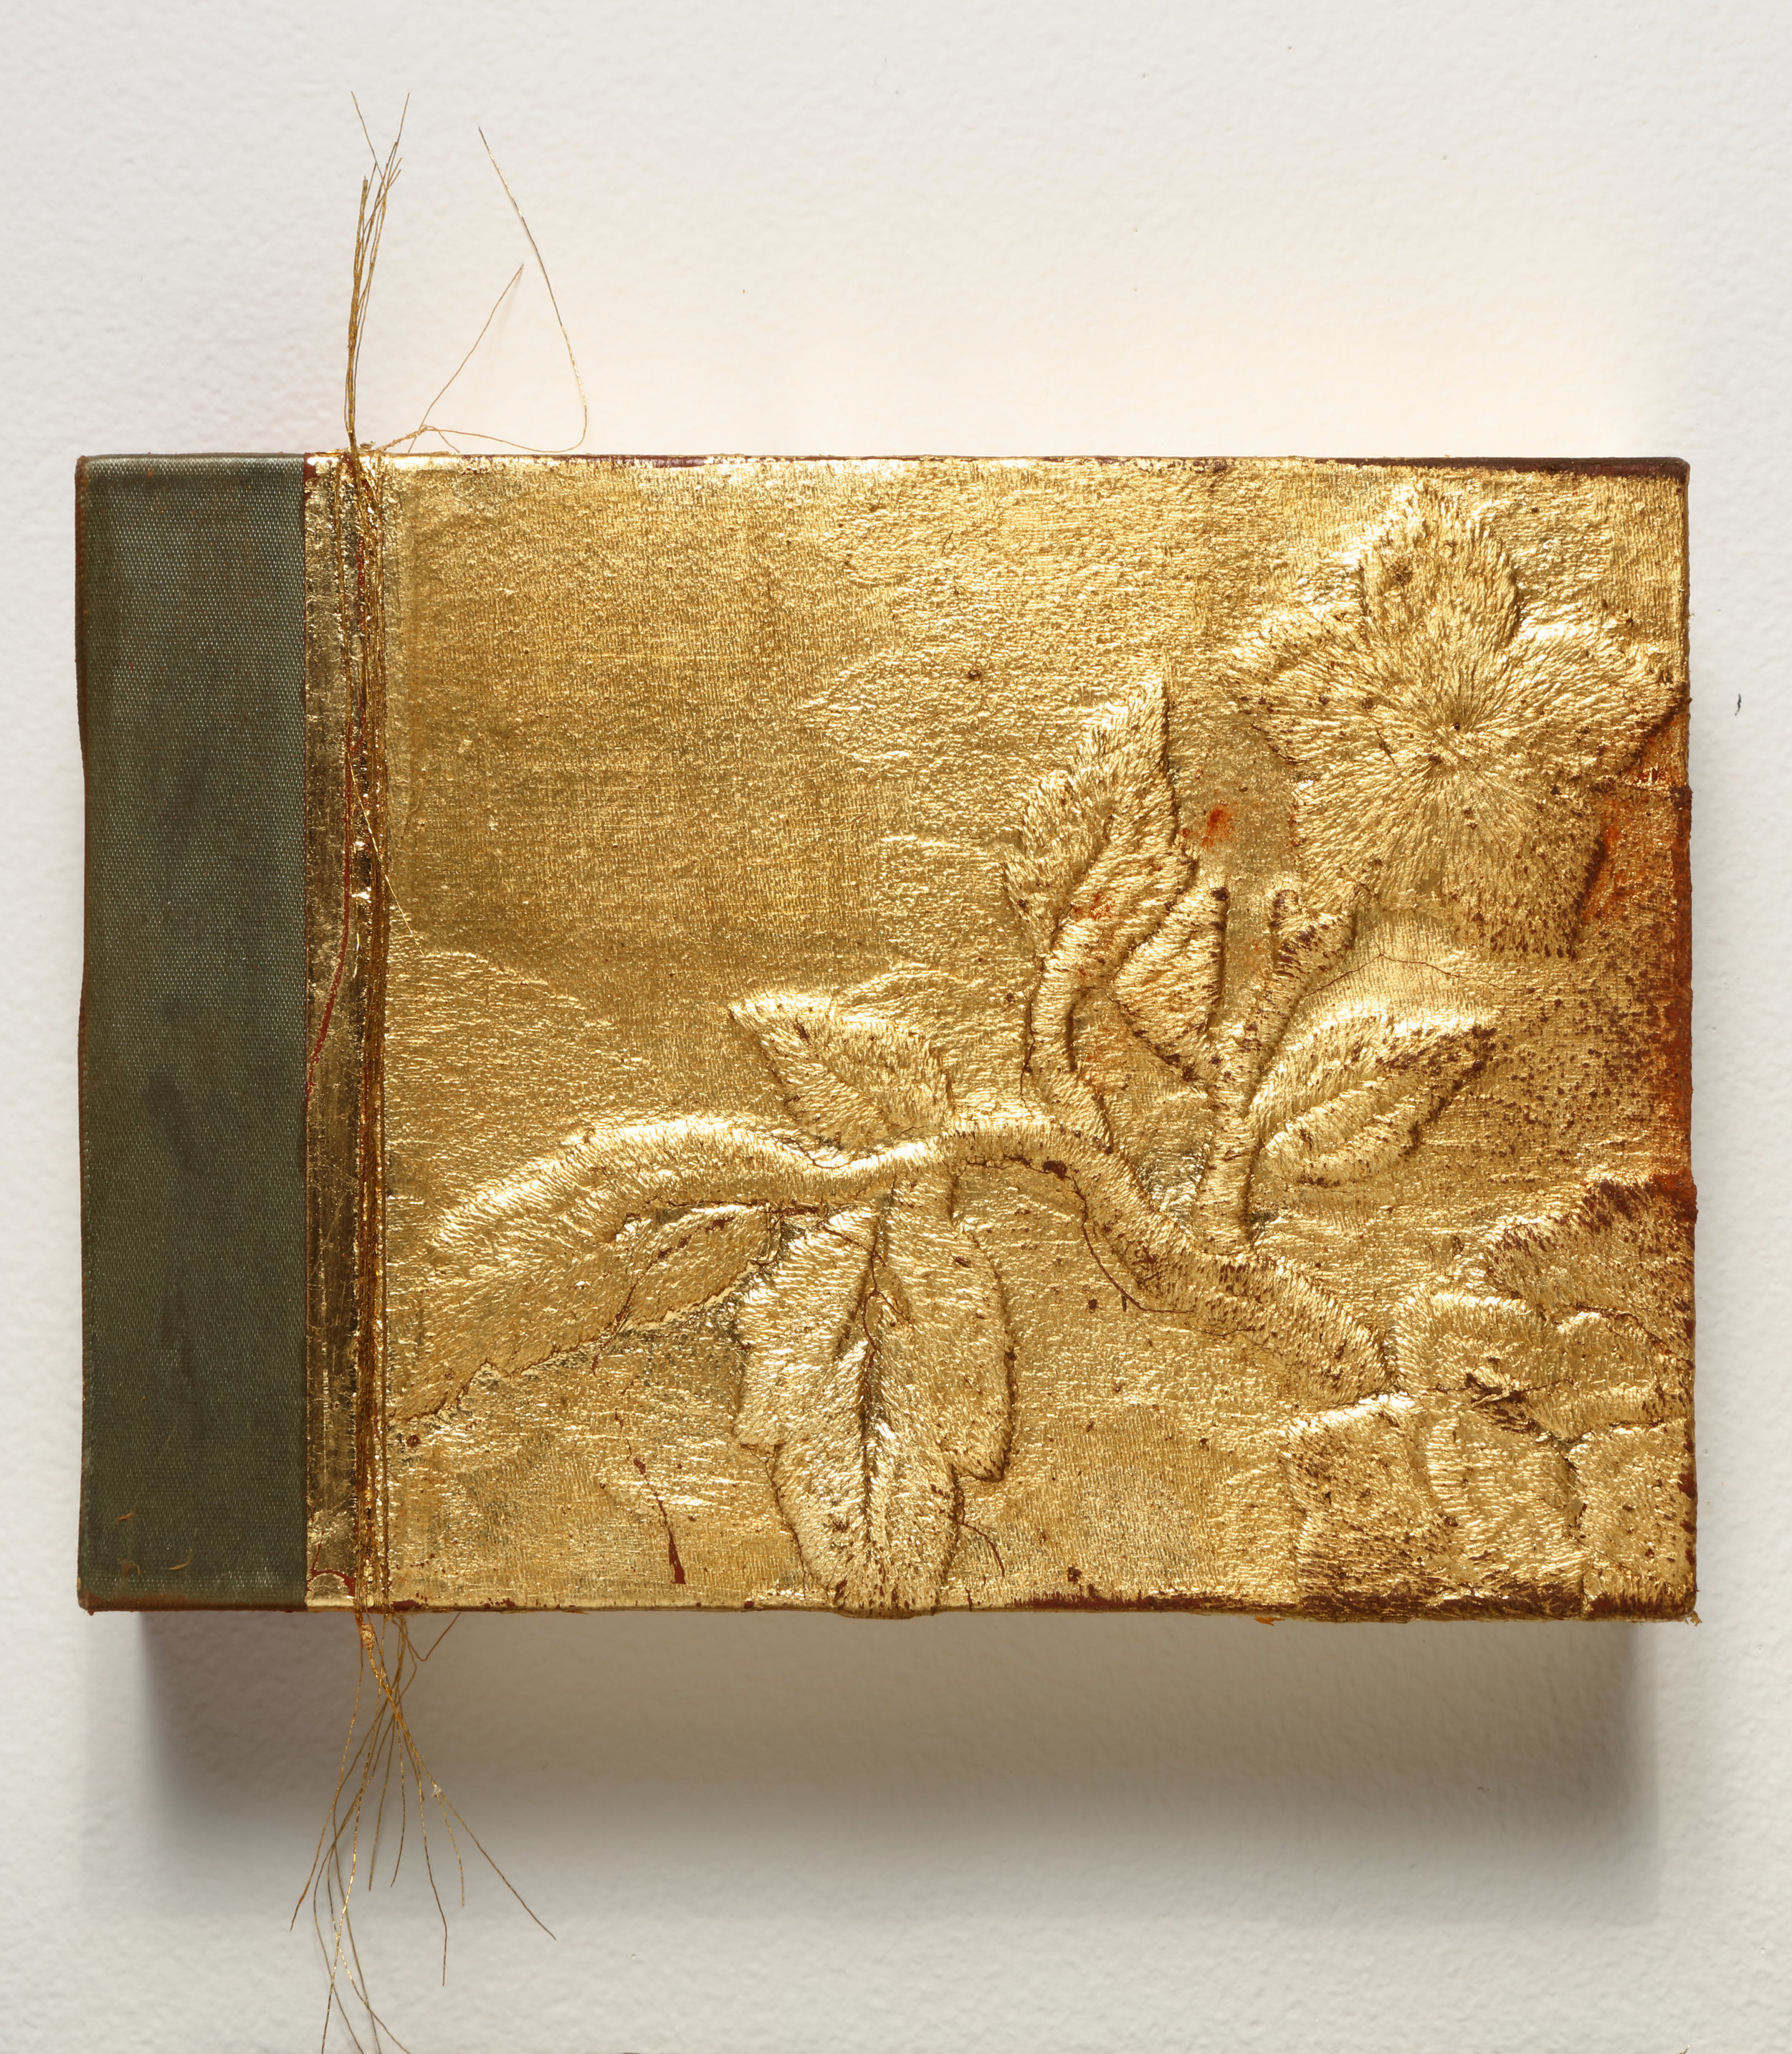 How To Add Gold Leaf To A Painting - Karen Hale